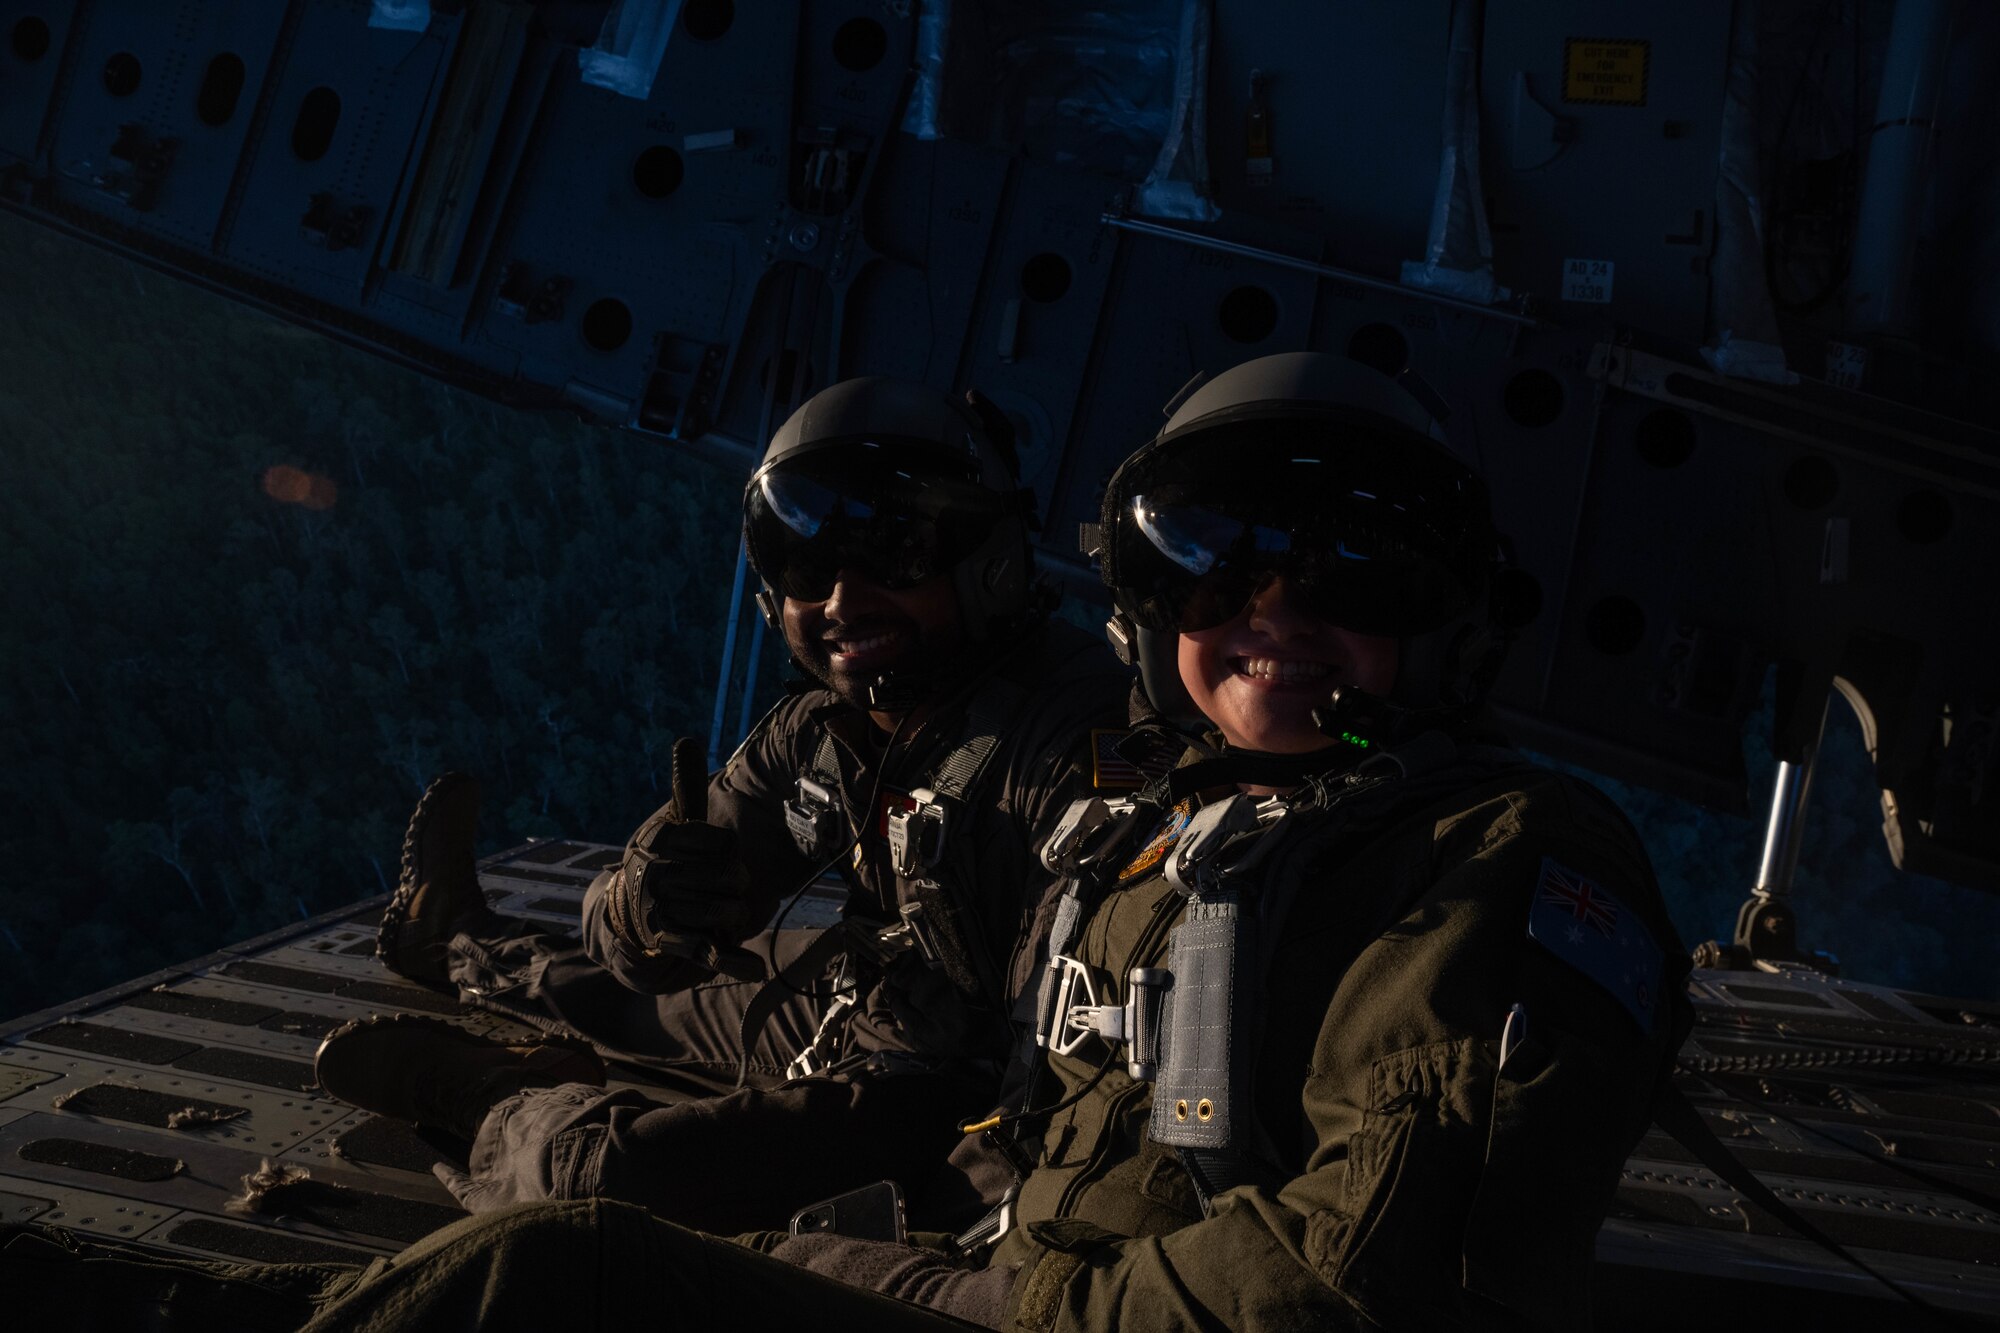 U.S. Air Force Senior Airman Jovanni Banuchi, 535th Airlift Squadron loadmaster, and Royal Australian Air Force Maddy Hardy, No. 36 Squadron loadmaster, sit on the ramp of a C-17 Globemaster III during a training flight around the skies of Australia for Global Dexterity 23-1, April 27, 2023. Exercise Global Dexterity 2023 is being conducted at RAAF Base Amberley, and is designed to help enhance air cooperation between the U.S. and Australia and increase our combined capabilities, improving security and stability in the Indo-Pacific region. (U.S. Air Force photo by Senior Airman Makensie Cooper)